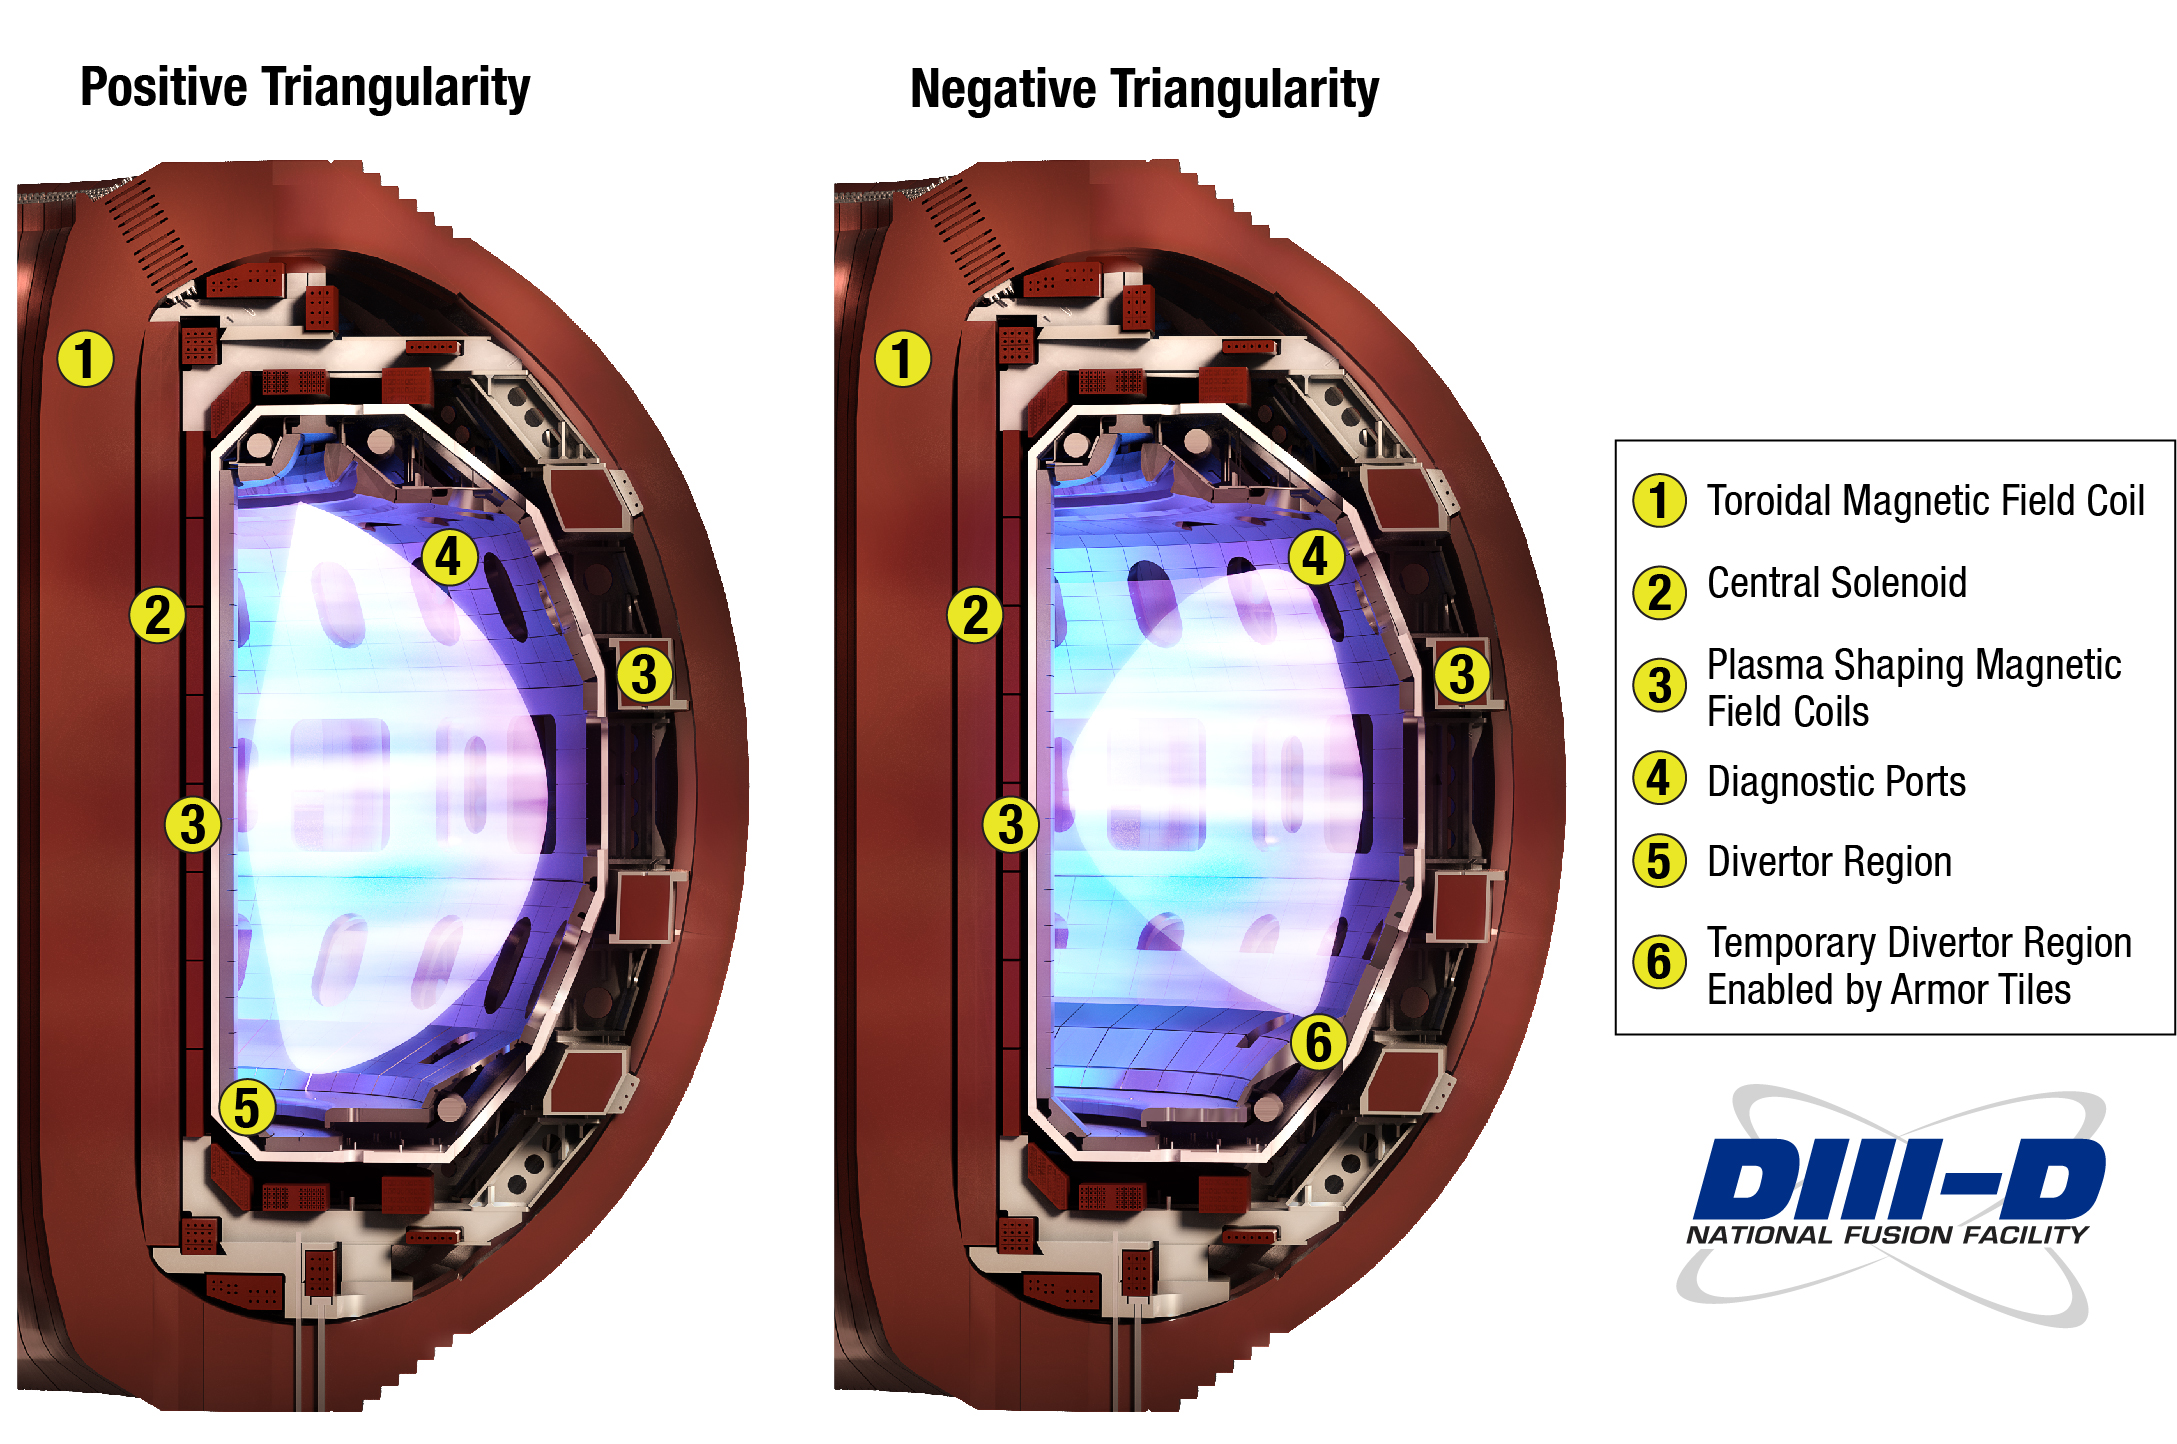 Figure 1: A side-by-side comparison of a standard plasma configuration, known as positive triangularity, and a plasma created as part of the negative triangularity campaign at the DIII-D National Fusion Facility. Additional armor tiles were installed to enable a temporary divertor region.